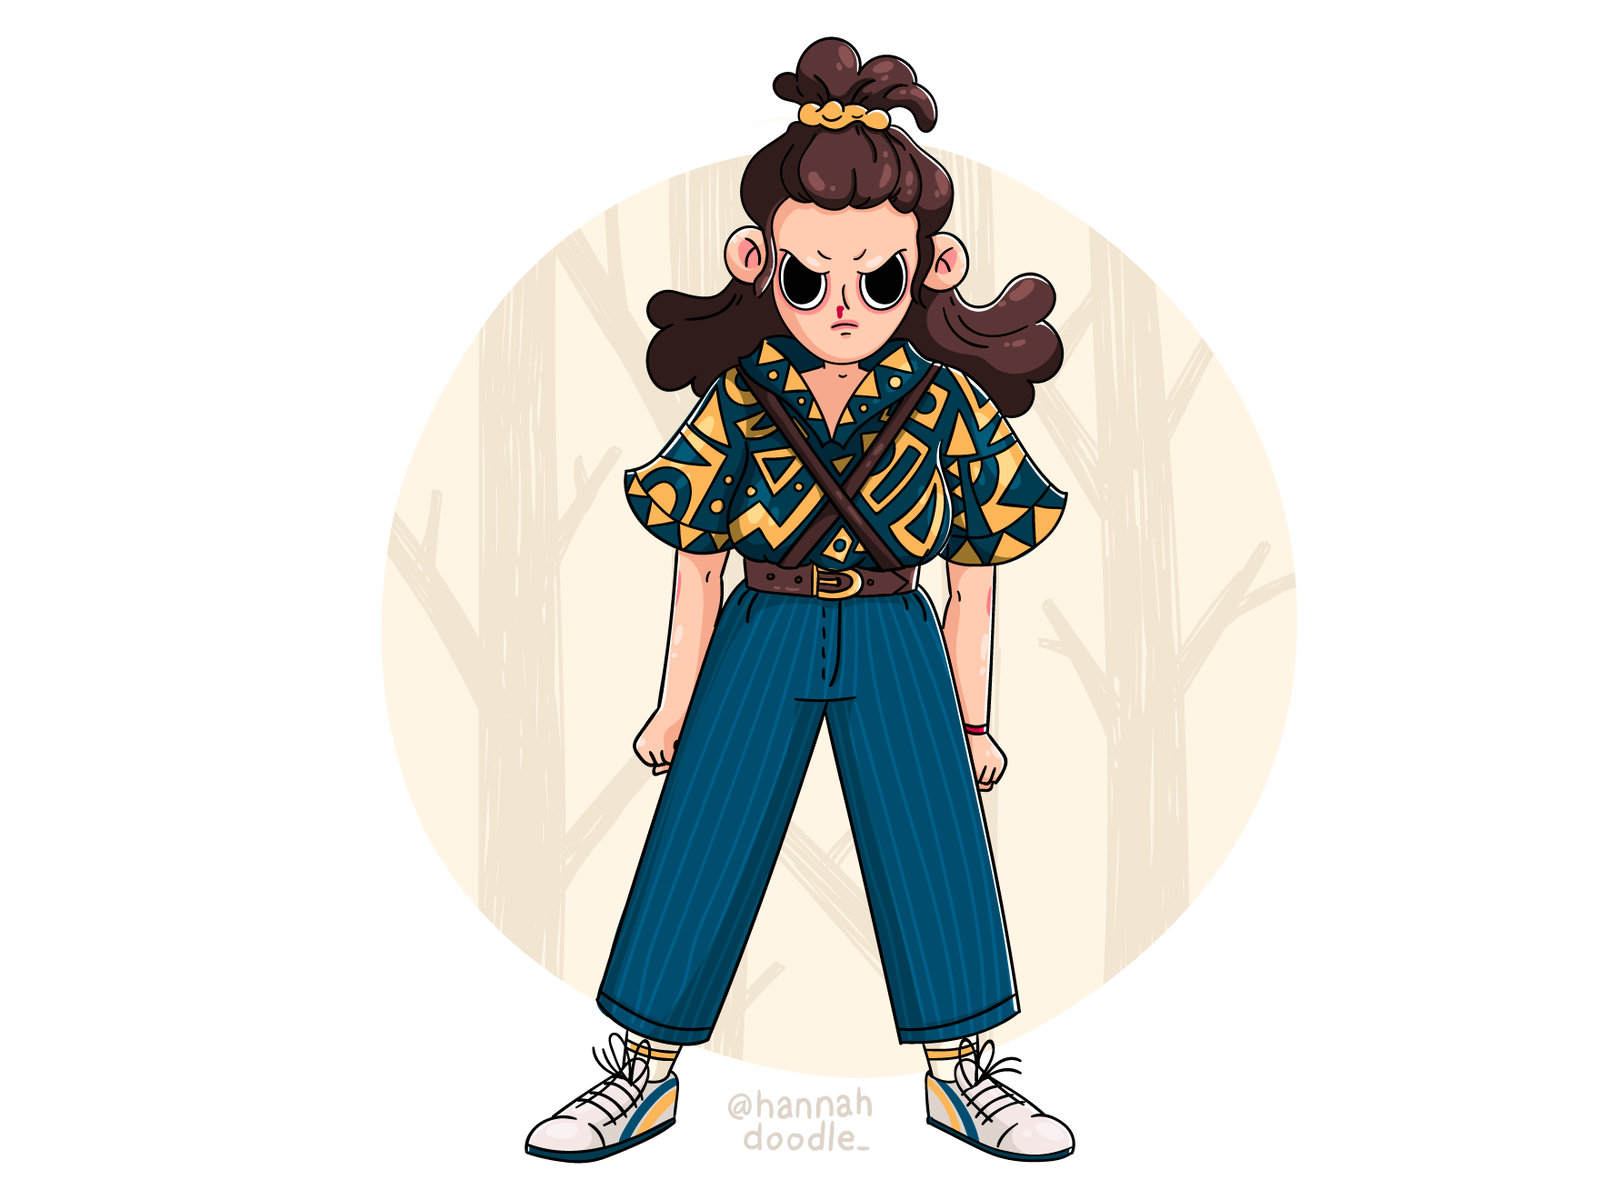 Stranger things Eleven by Anna Mozgovetc on Dribbble